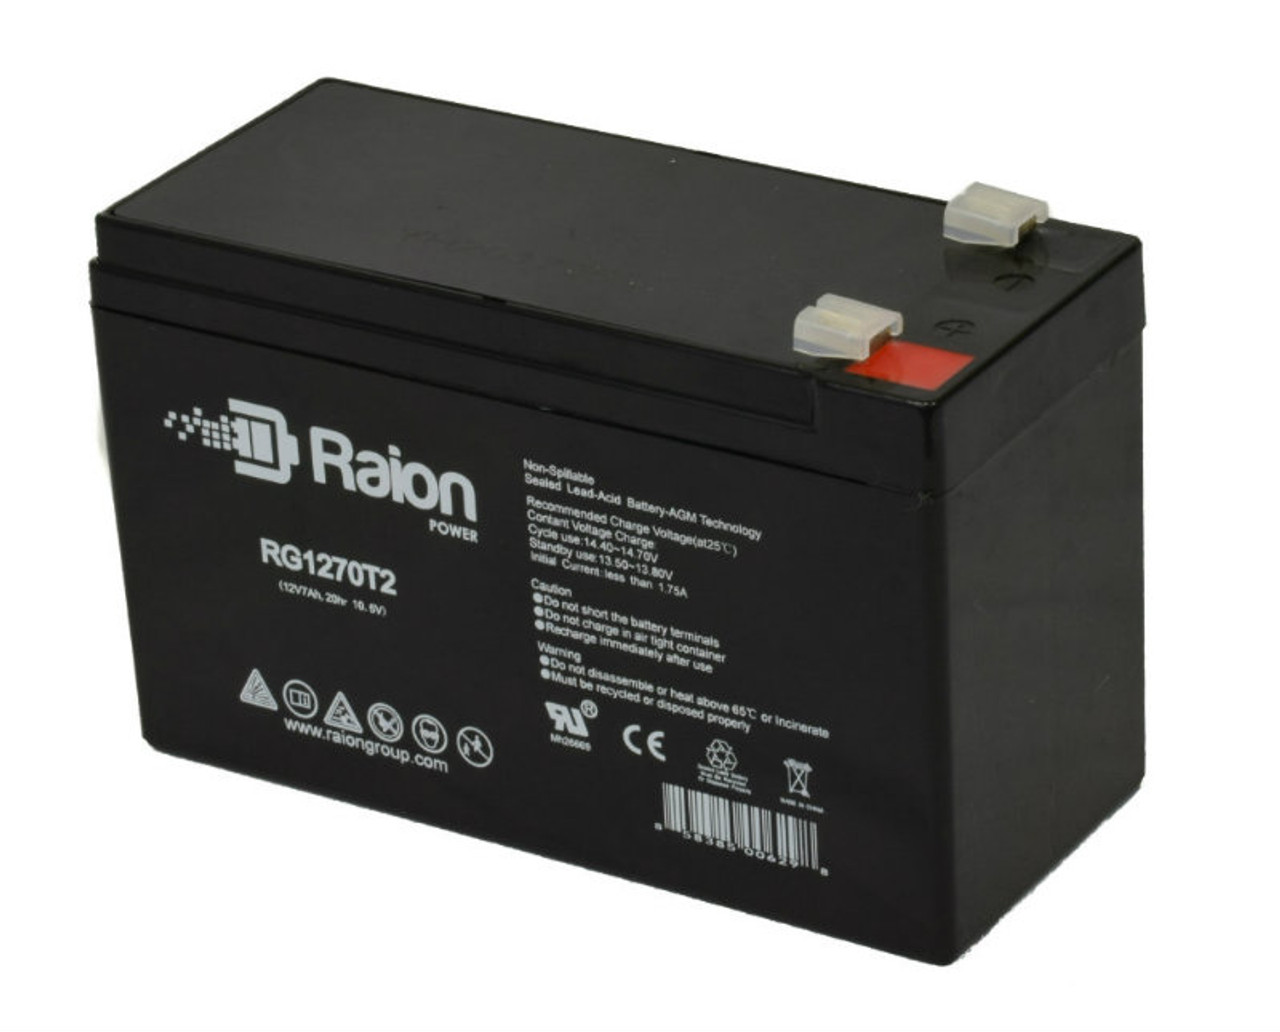 Raion Power Replacement 12V 7Ah RG1270T1 Fire Alarm Battery for Altronix AL300ULX